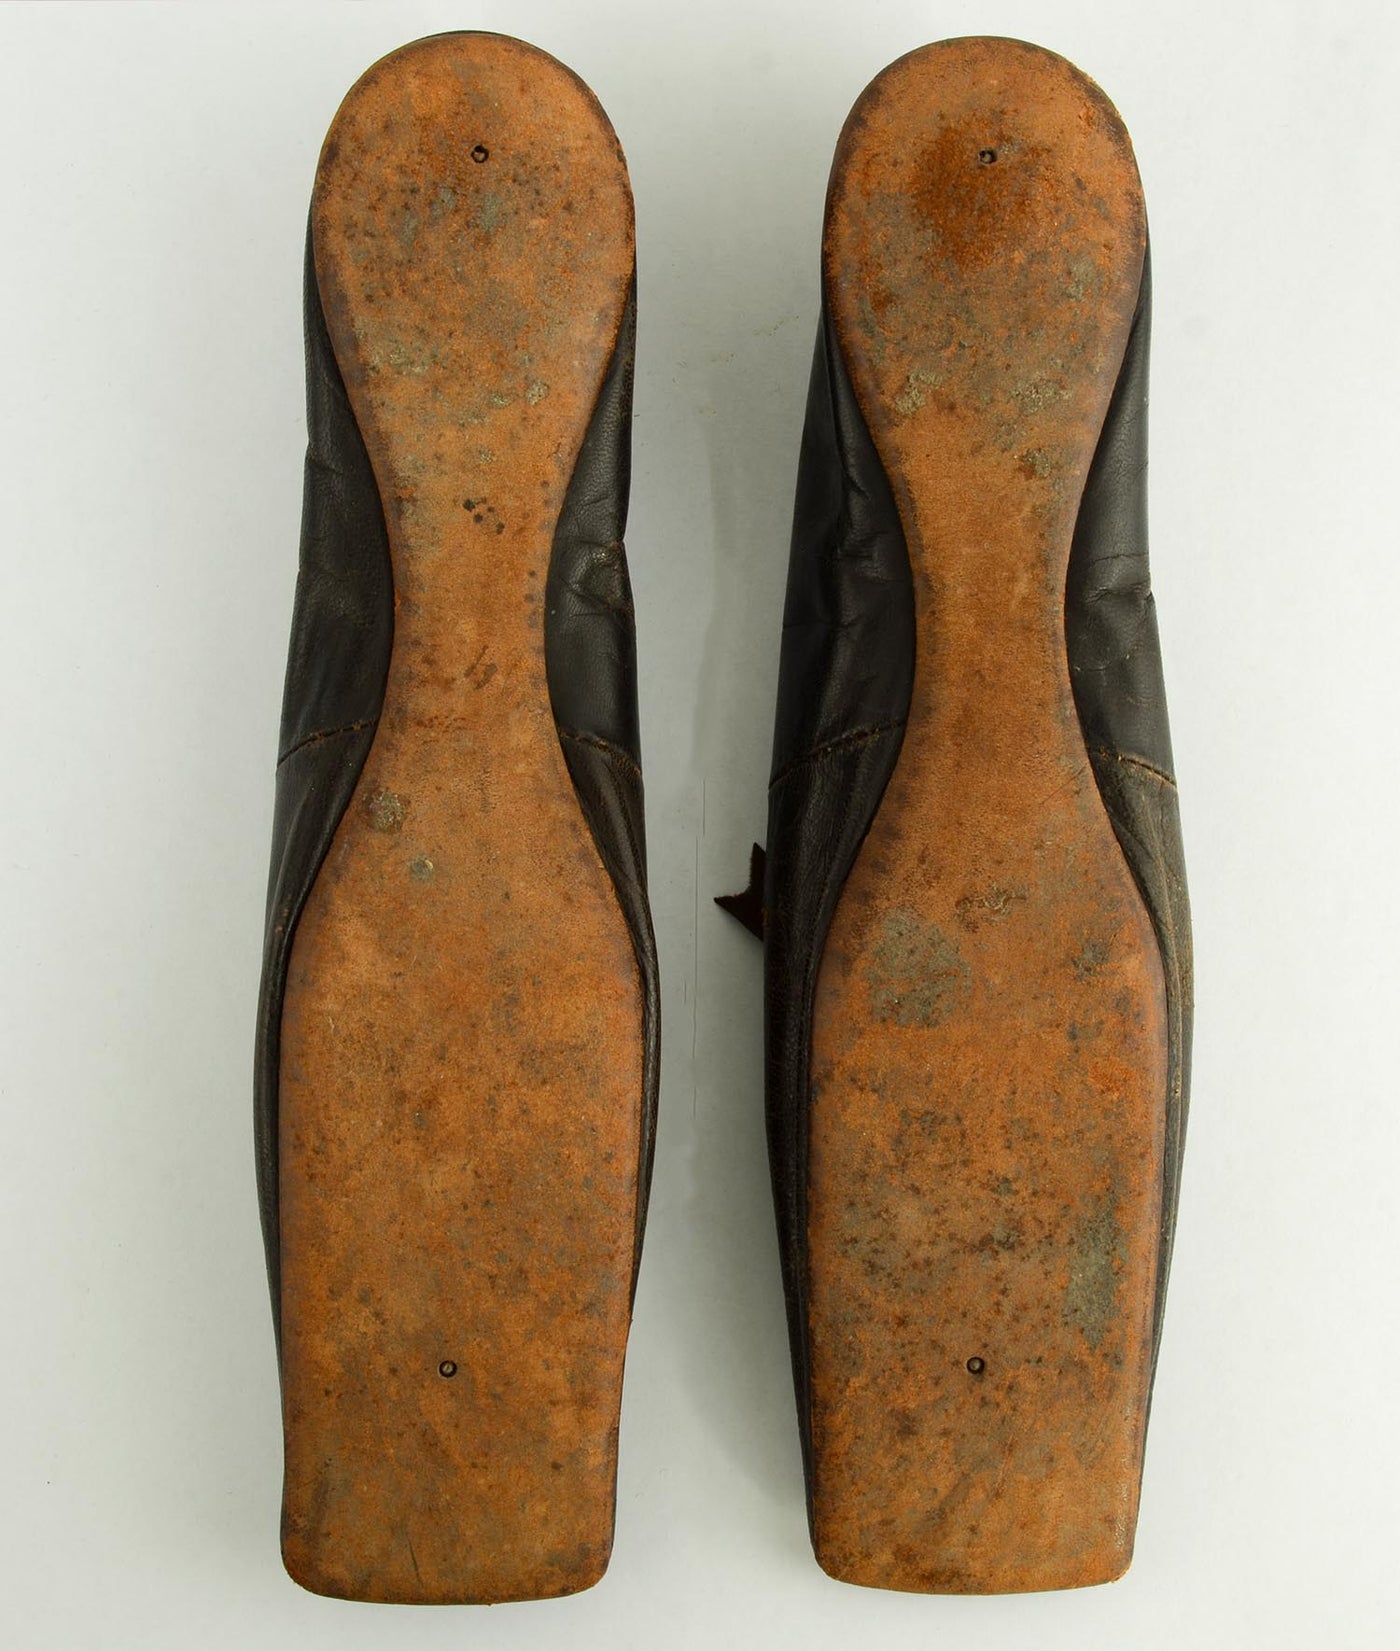 1387392-mid-19th-century-leather-shoes-3-bottom-of-soles